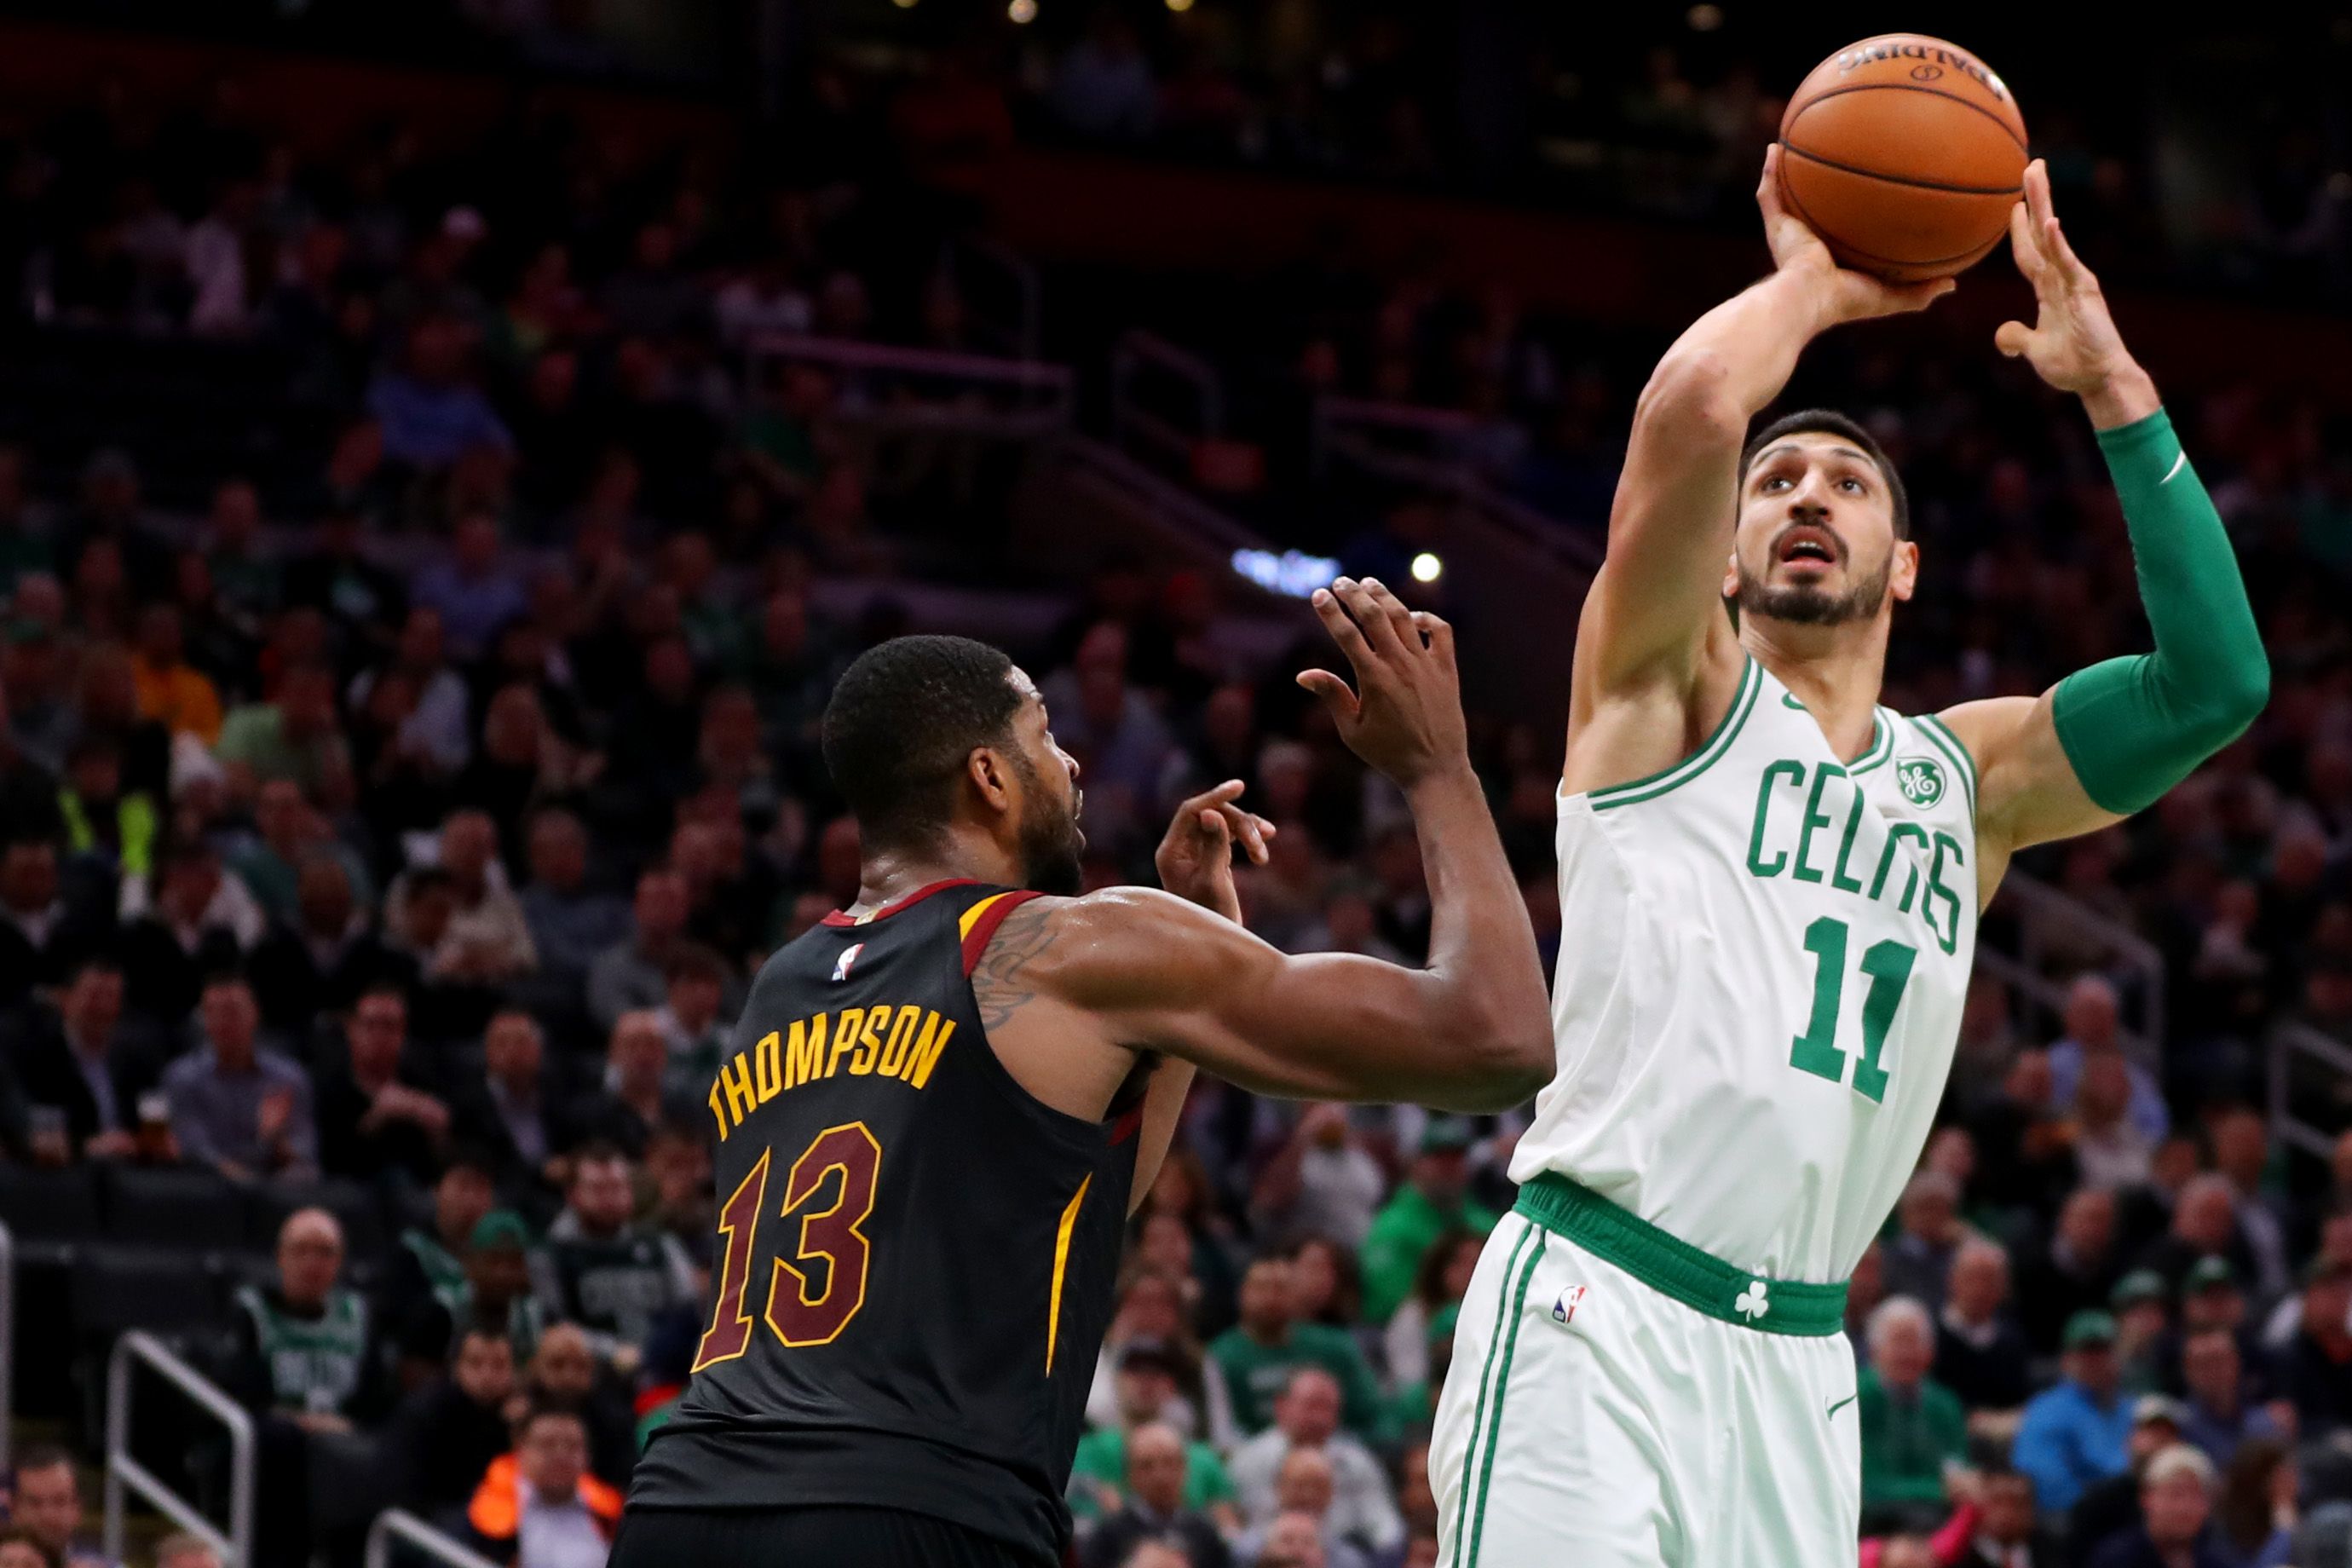 Boston Celtics' Kanter sparks backlash in China after comments on Tibet, Xi